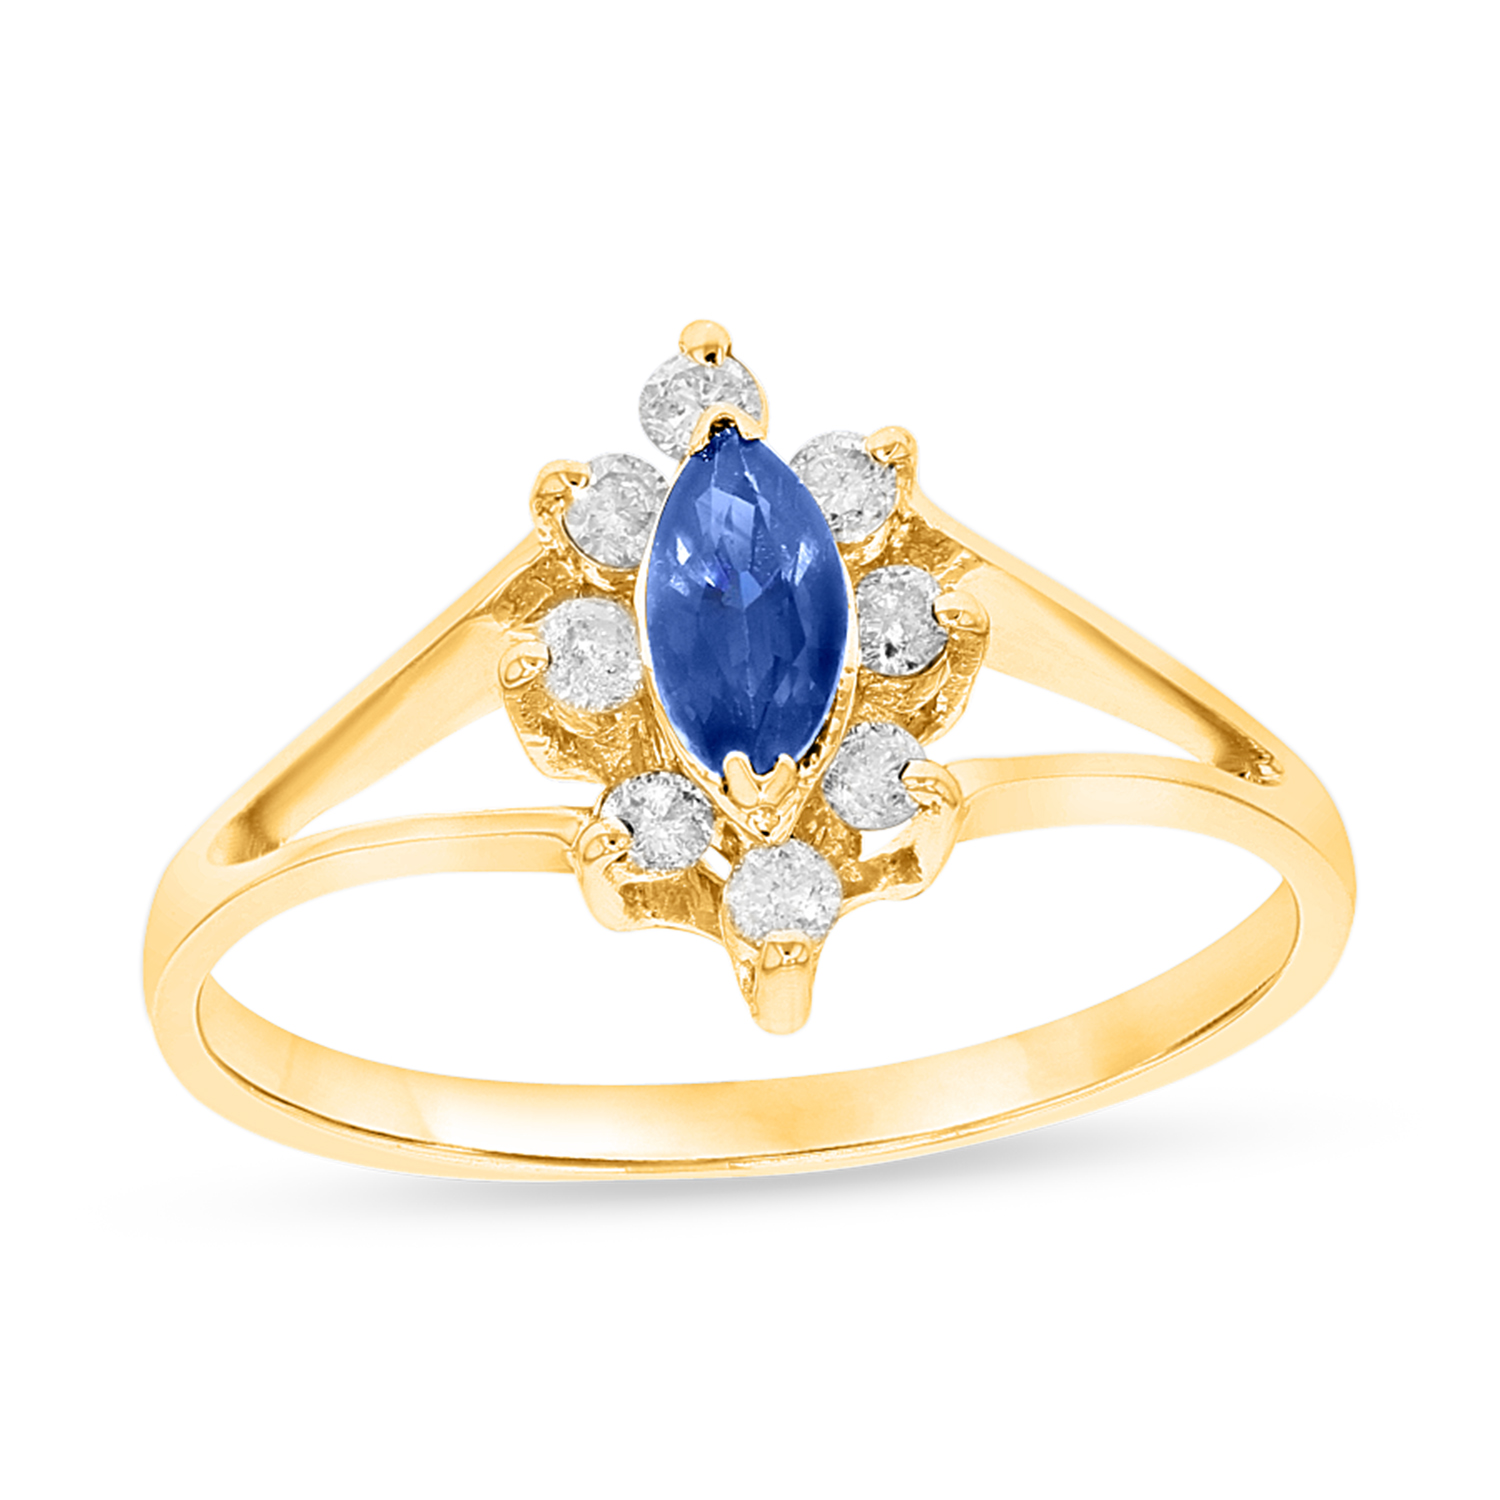 View 0.15ctw Diamond and Sapphire Marquis Ring in 14k Yellow Gold